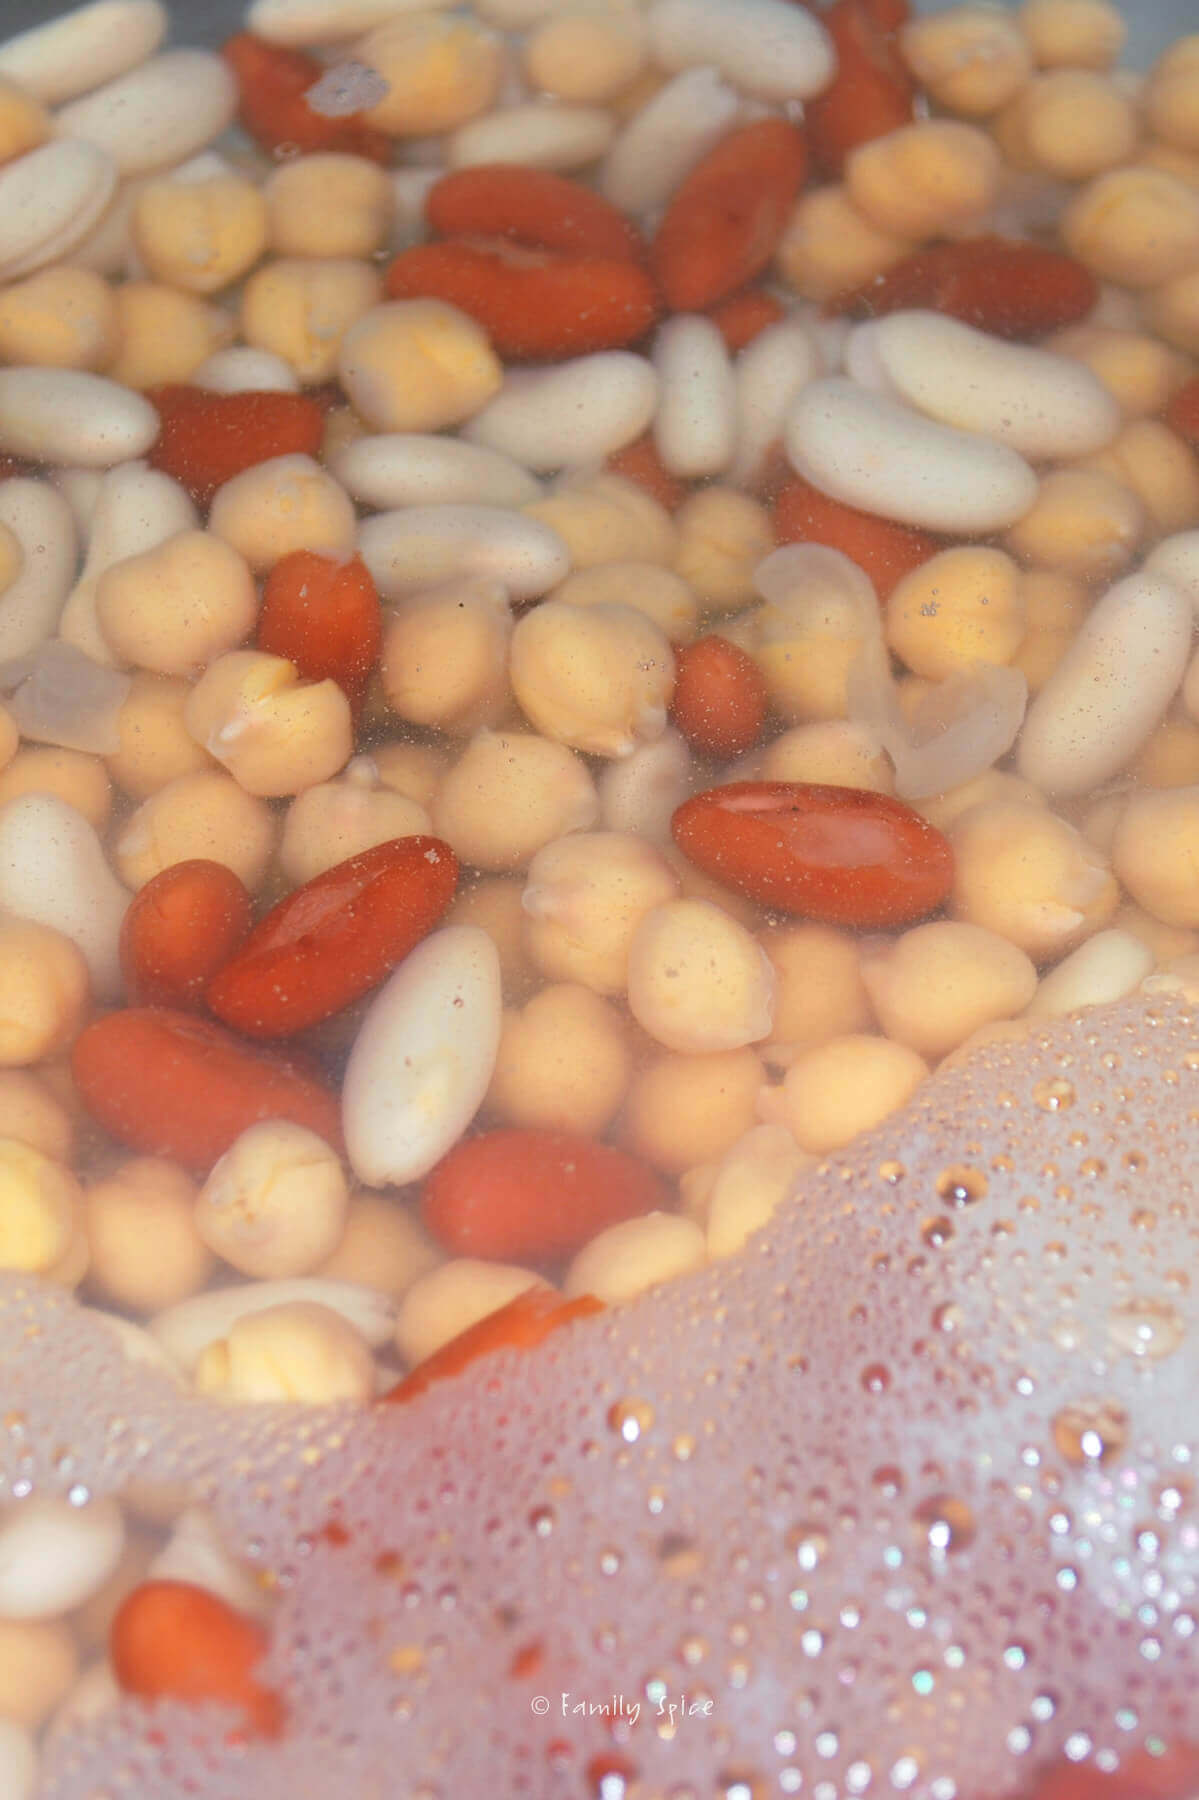 A variety of beans soaking in water